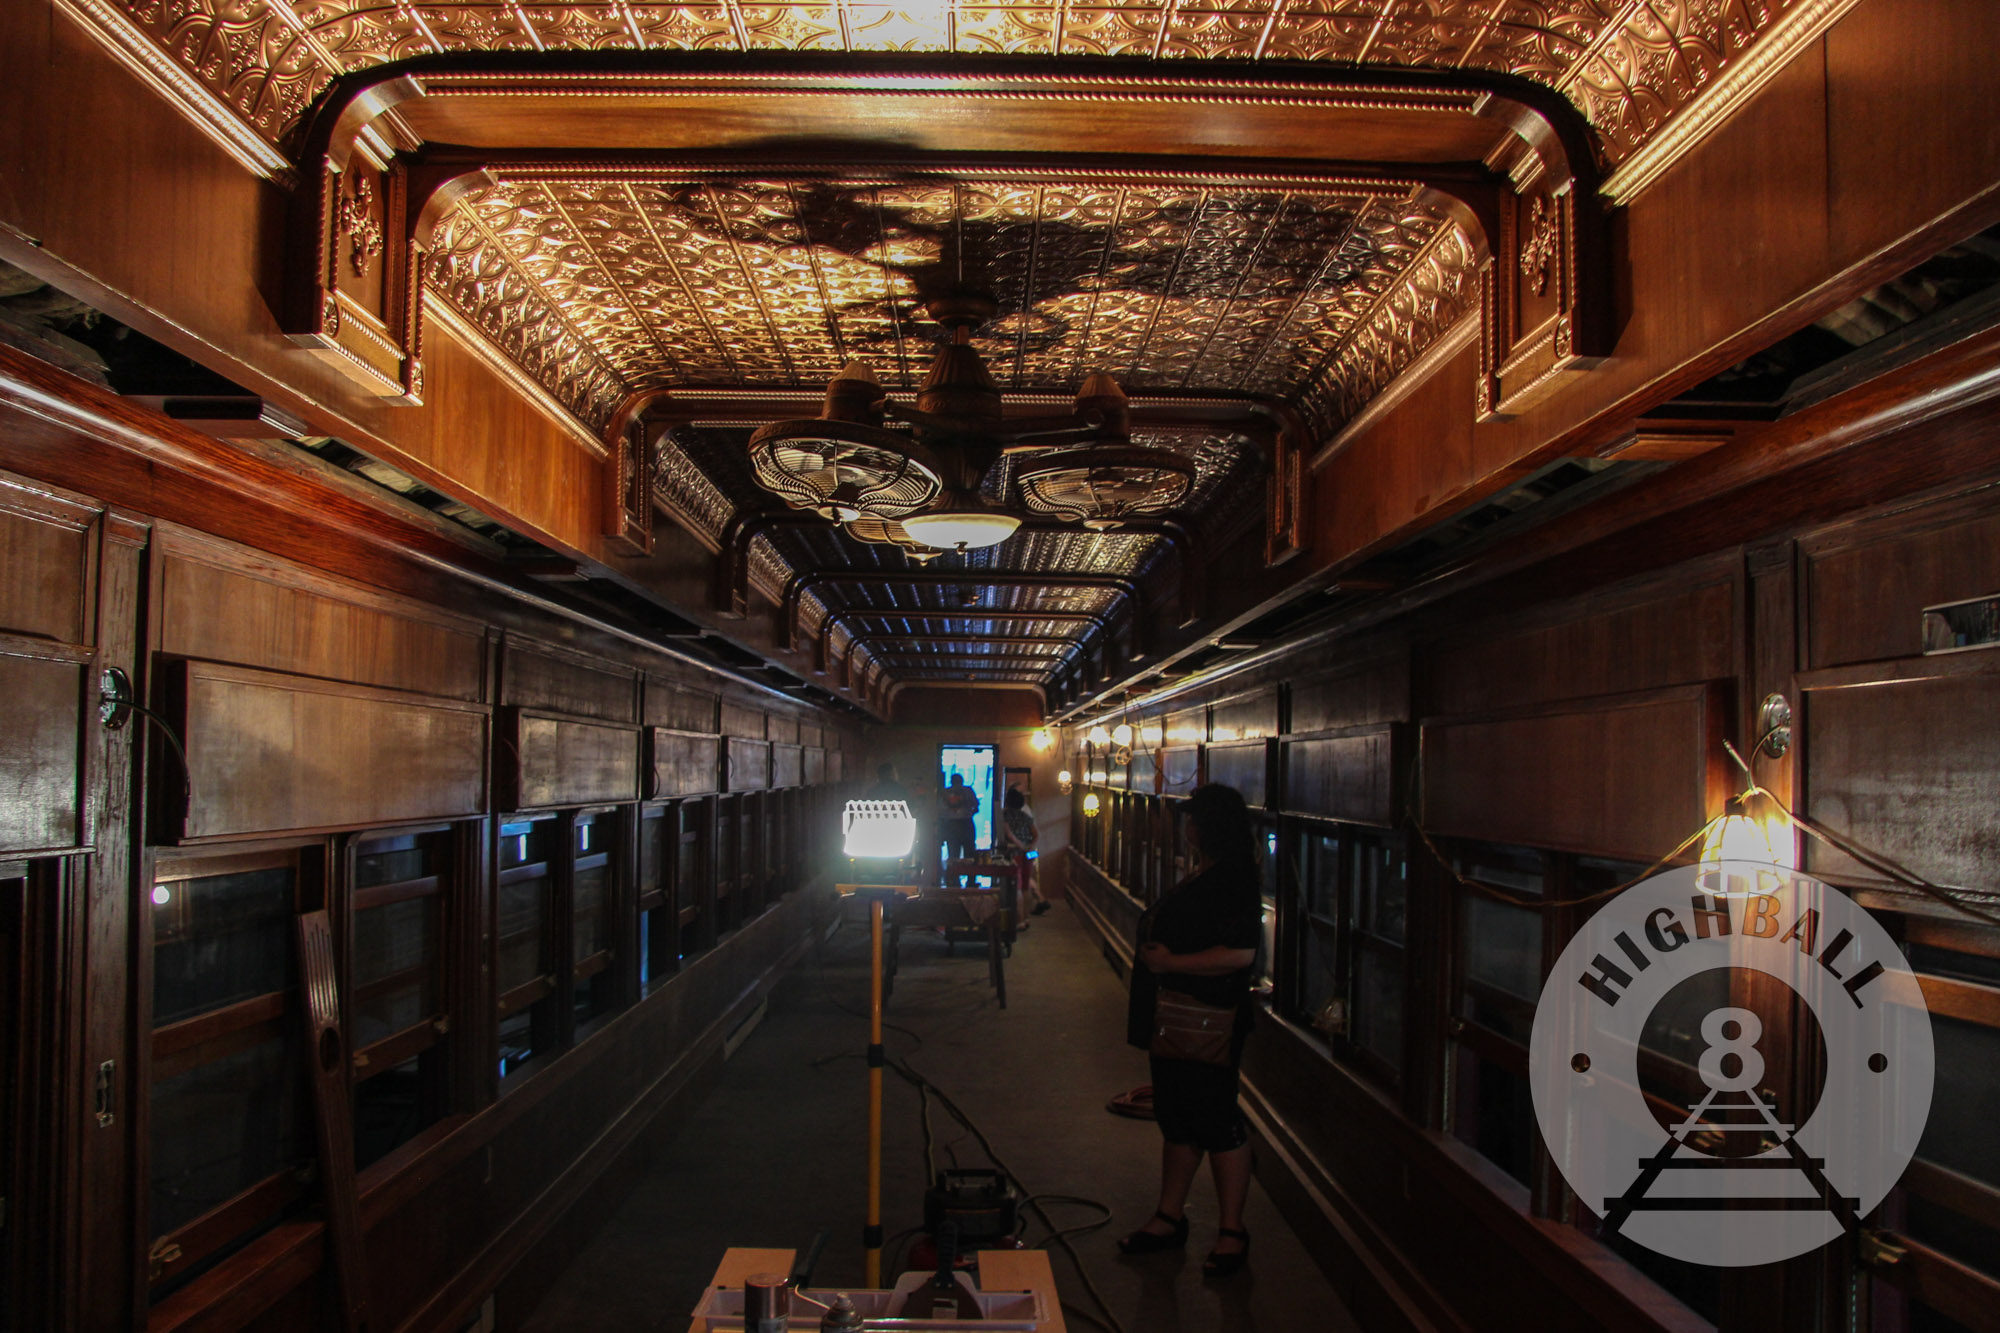 The interior of an classic luxury passenger car in the workshops of the Reading Blue Mountain & Northern Railroad, Port Clinton, Pennsylvania, USA, 2016.